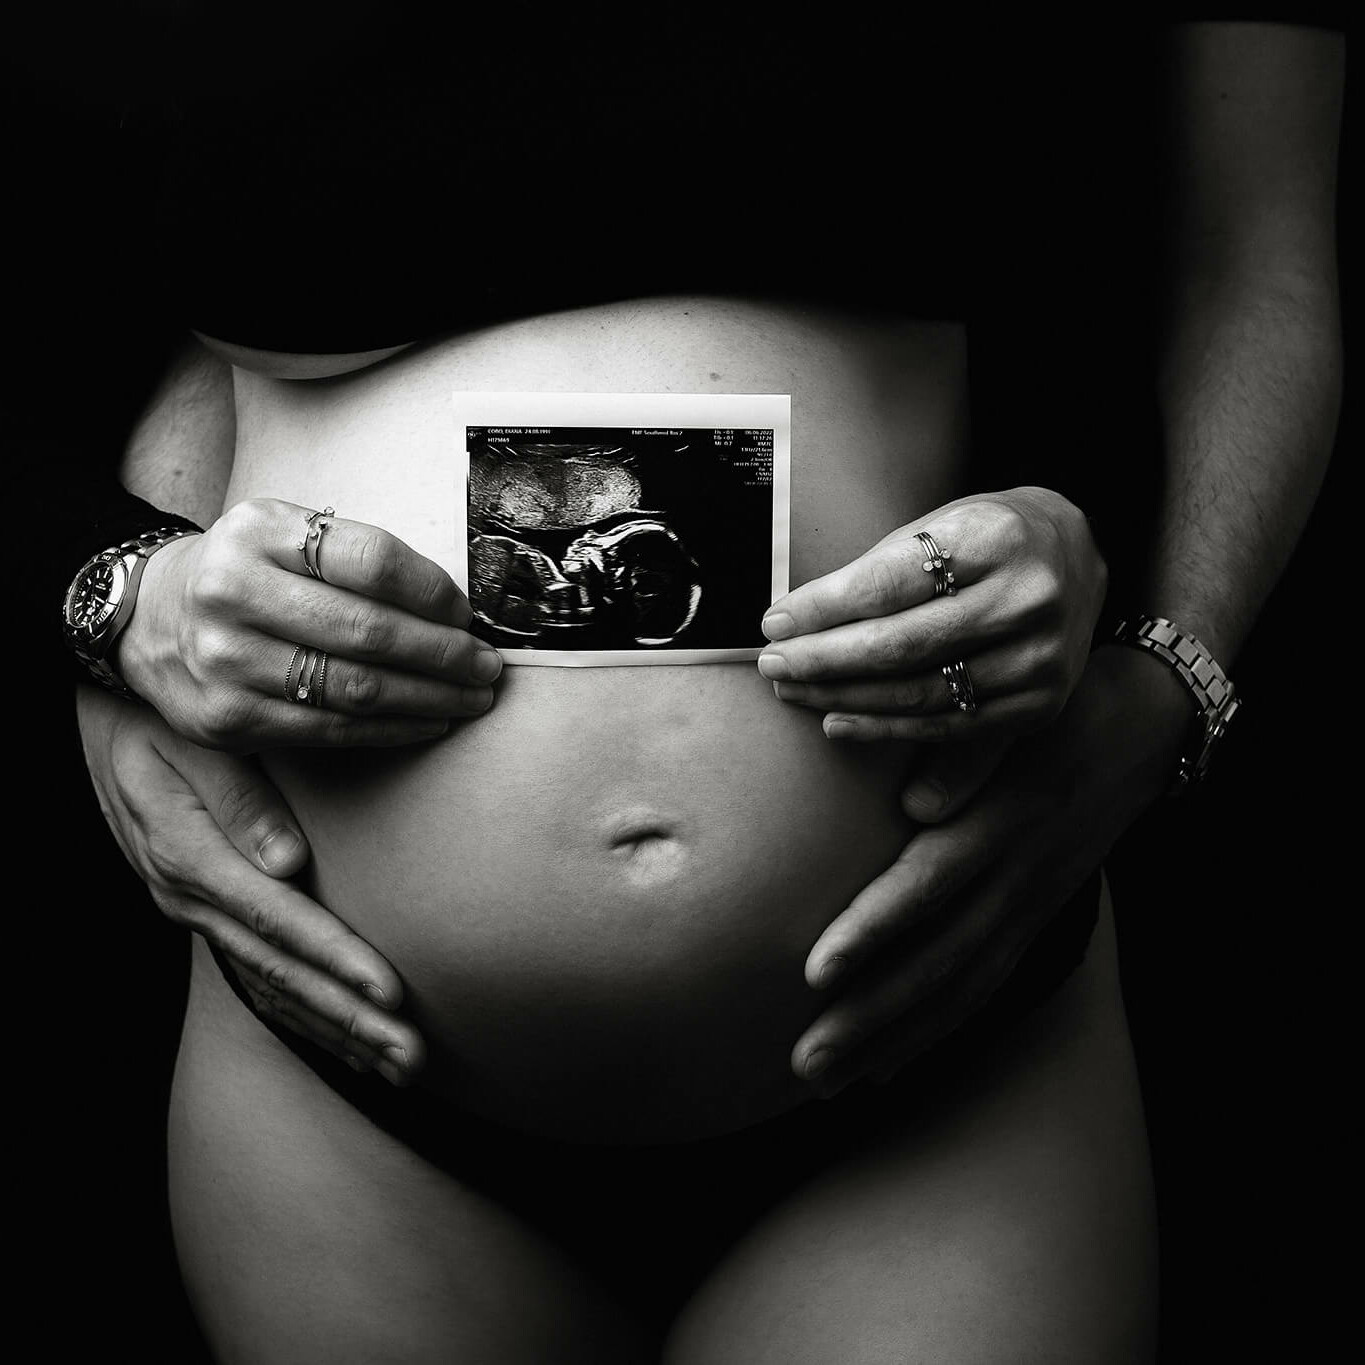 An image of a pregnant woman holding an ultrasound.